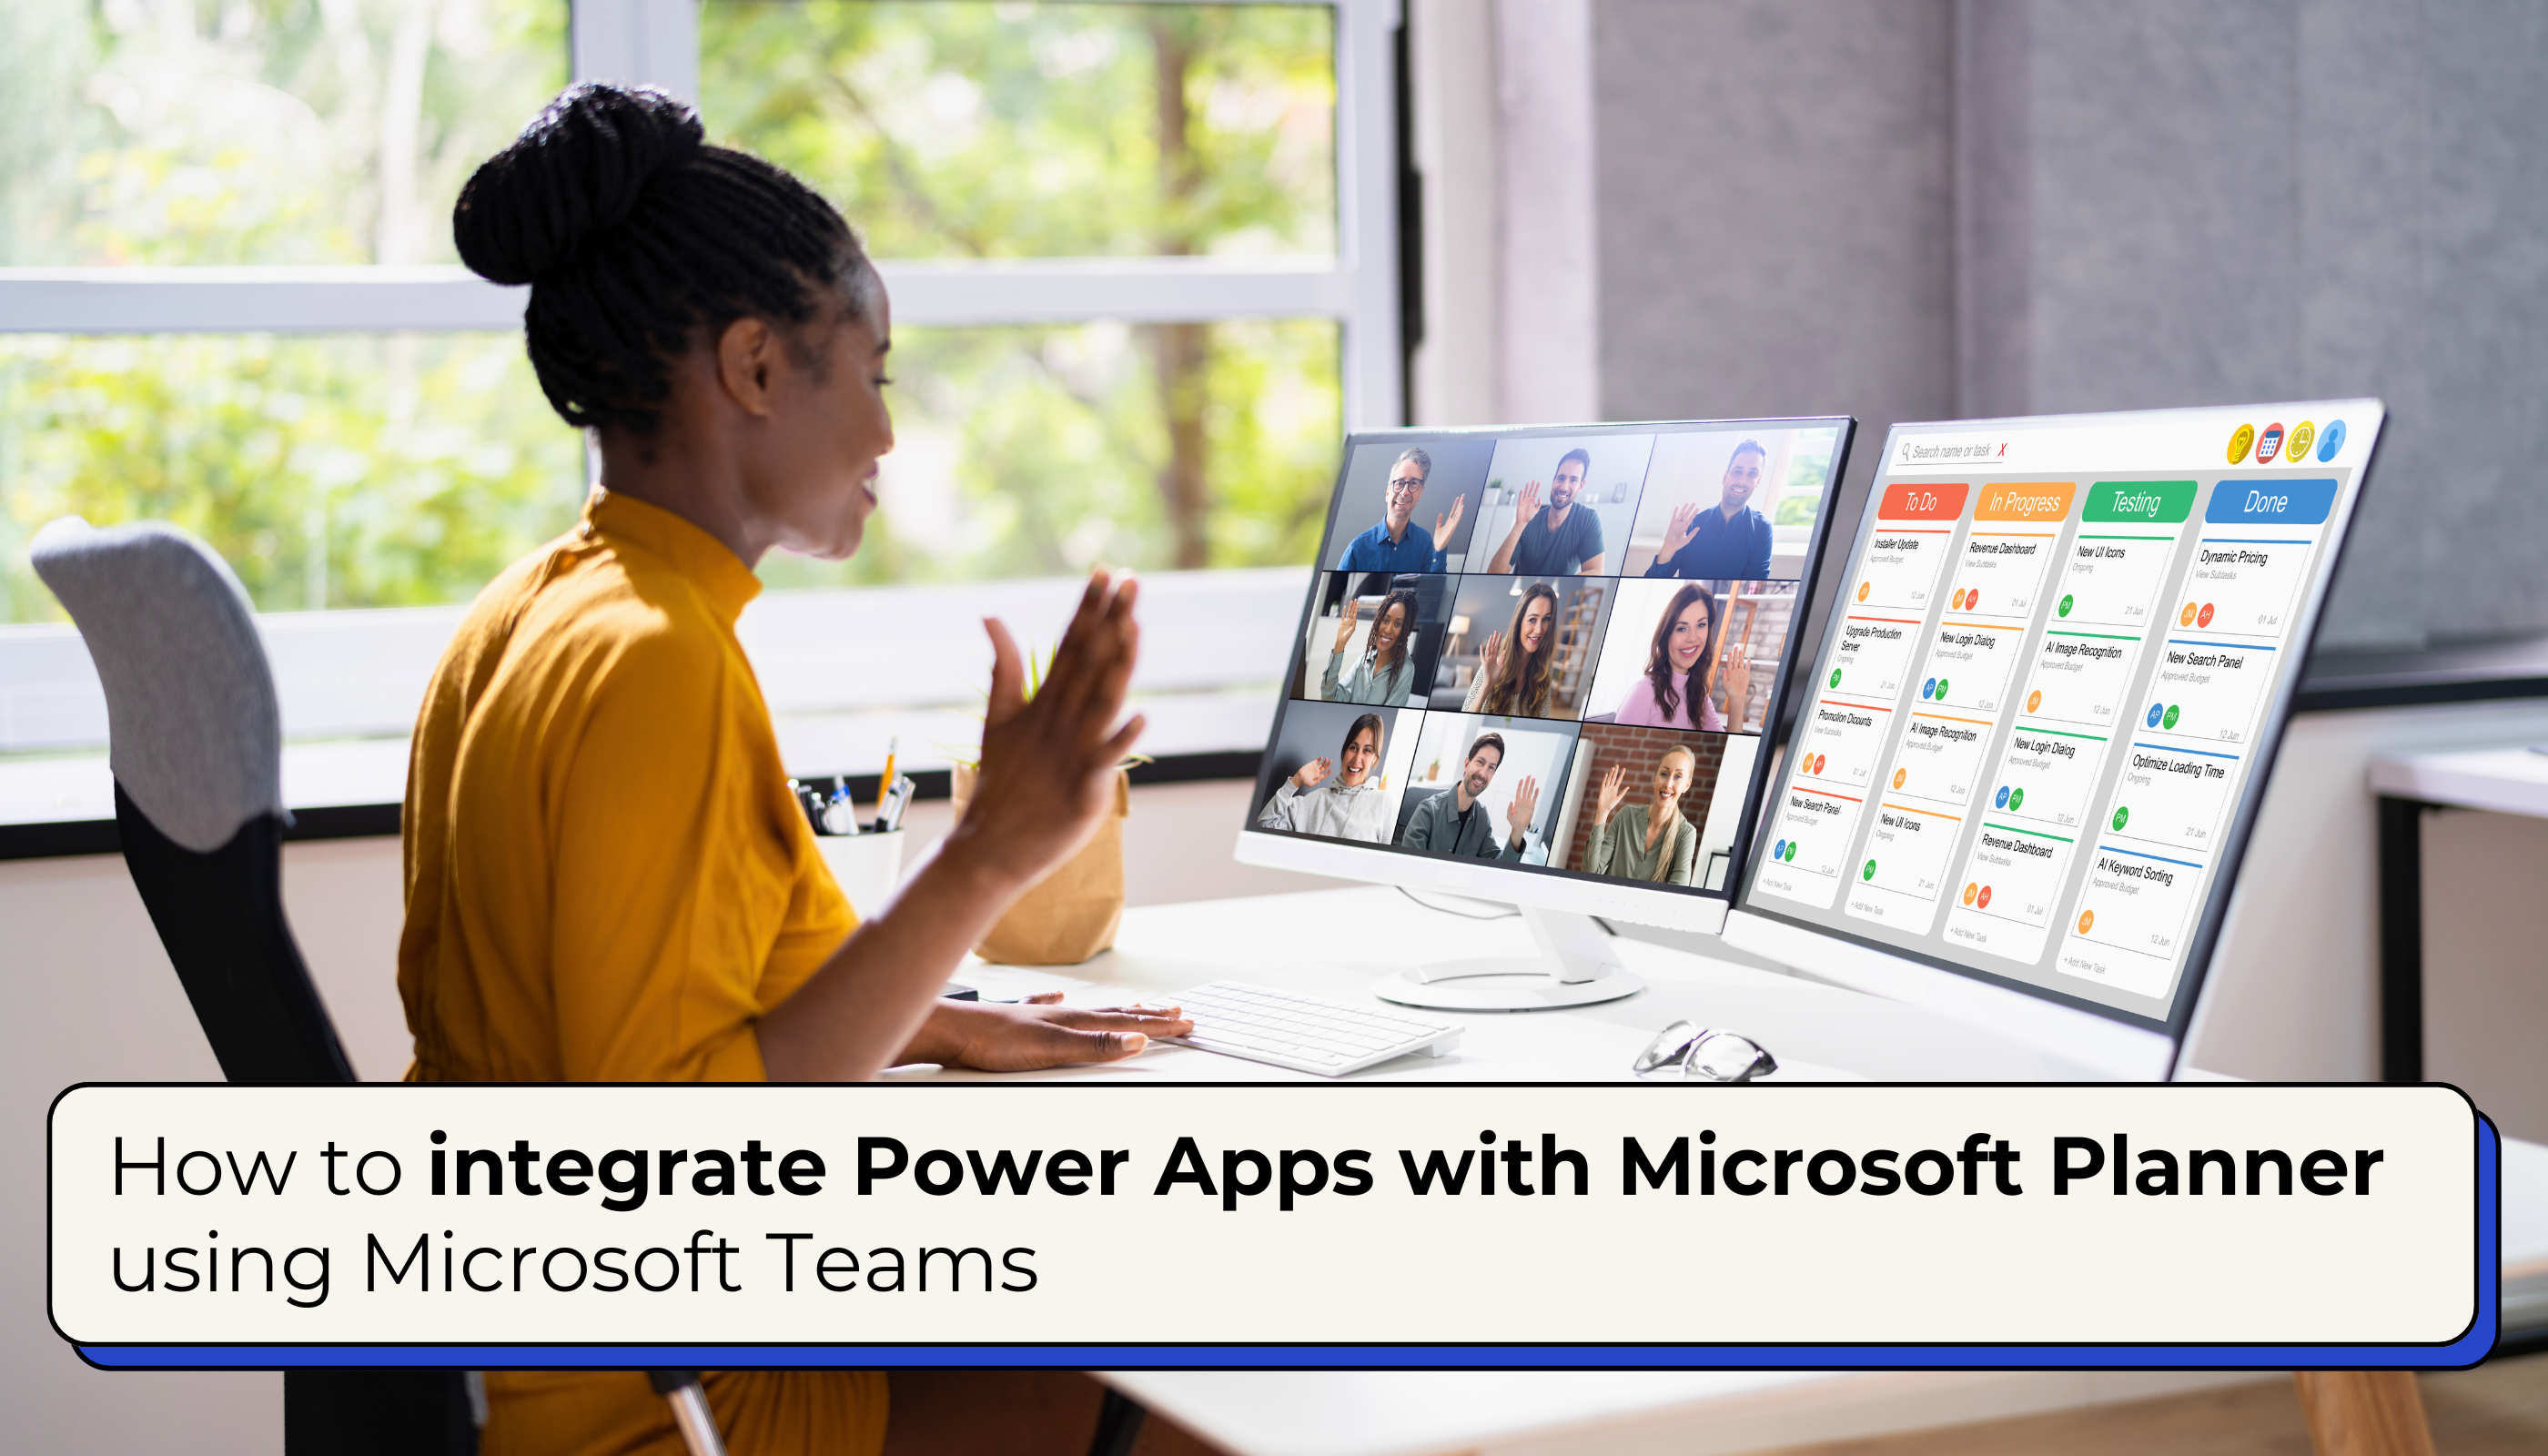 How to Integrate Power Apps with Microsoft Planner using Microsoft Teams